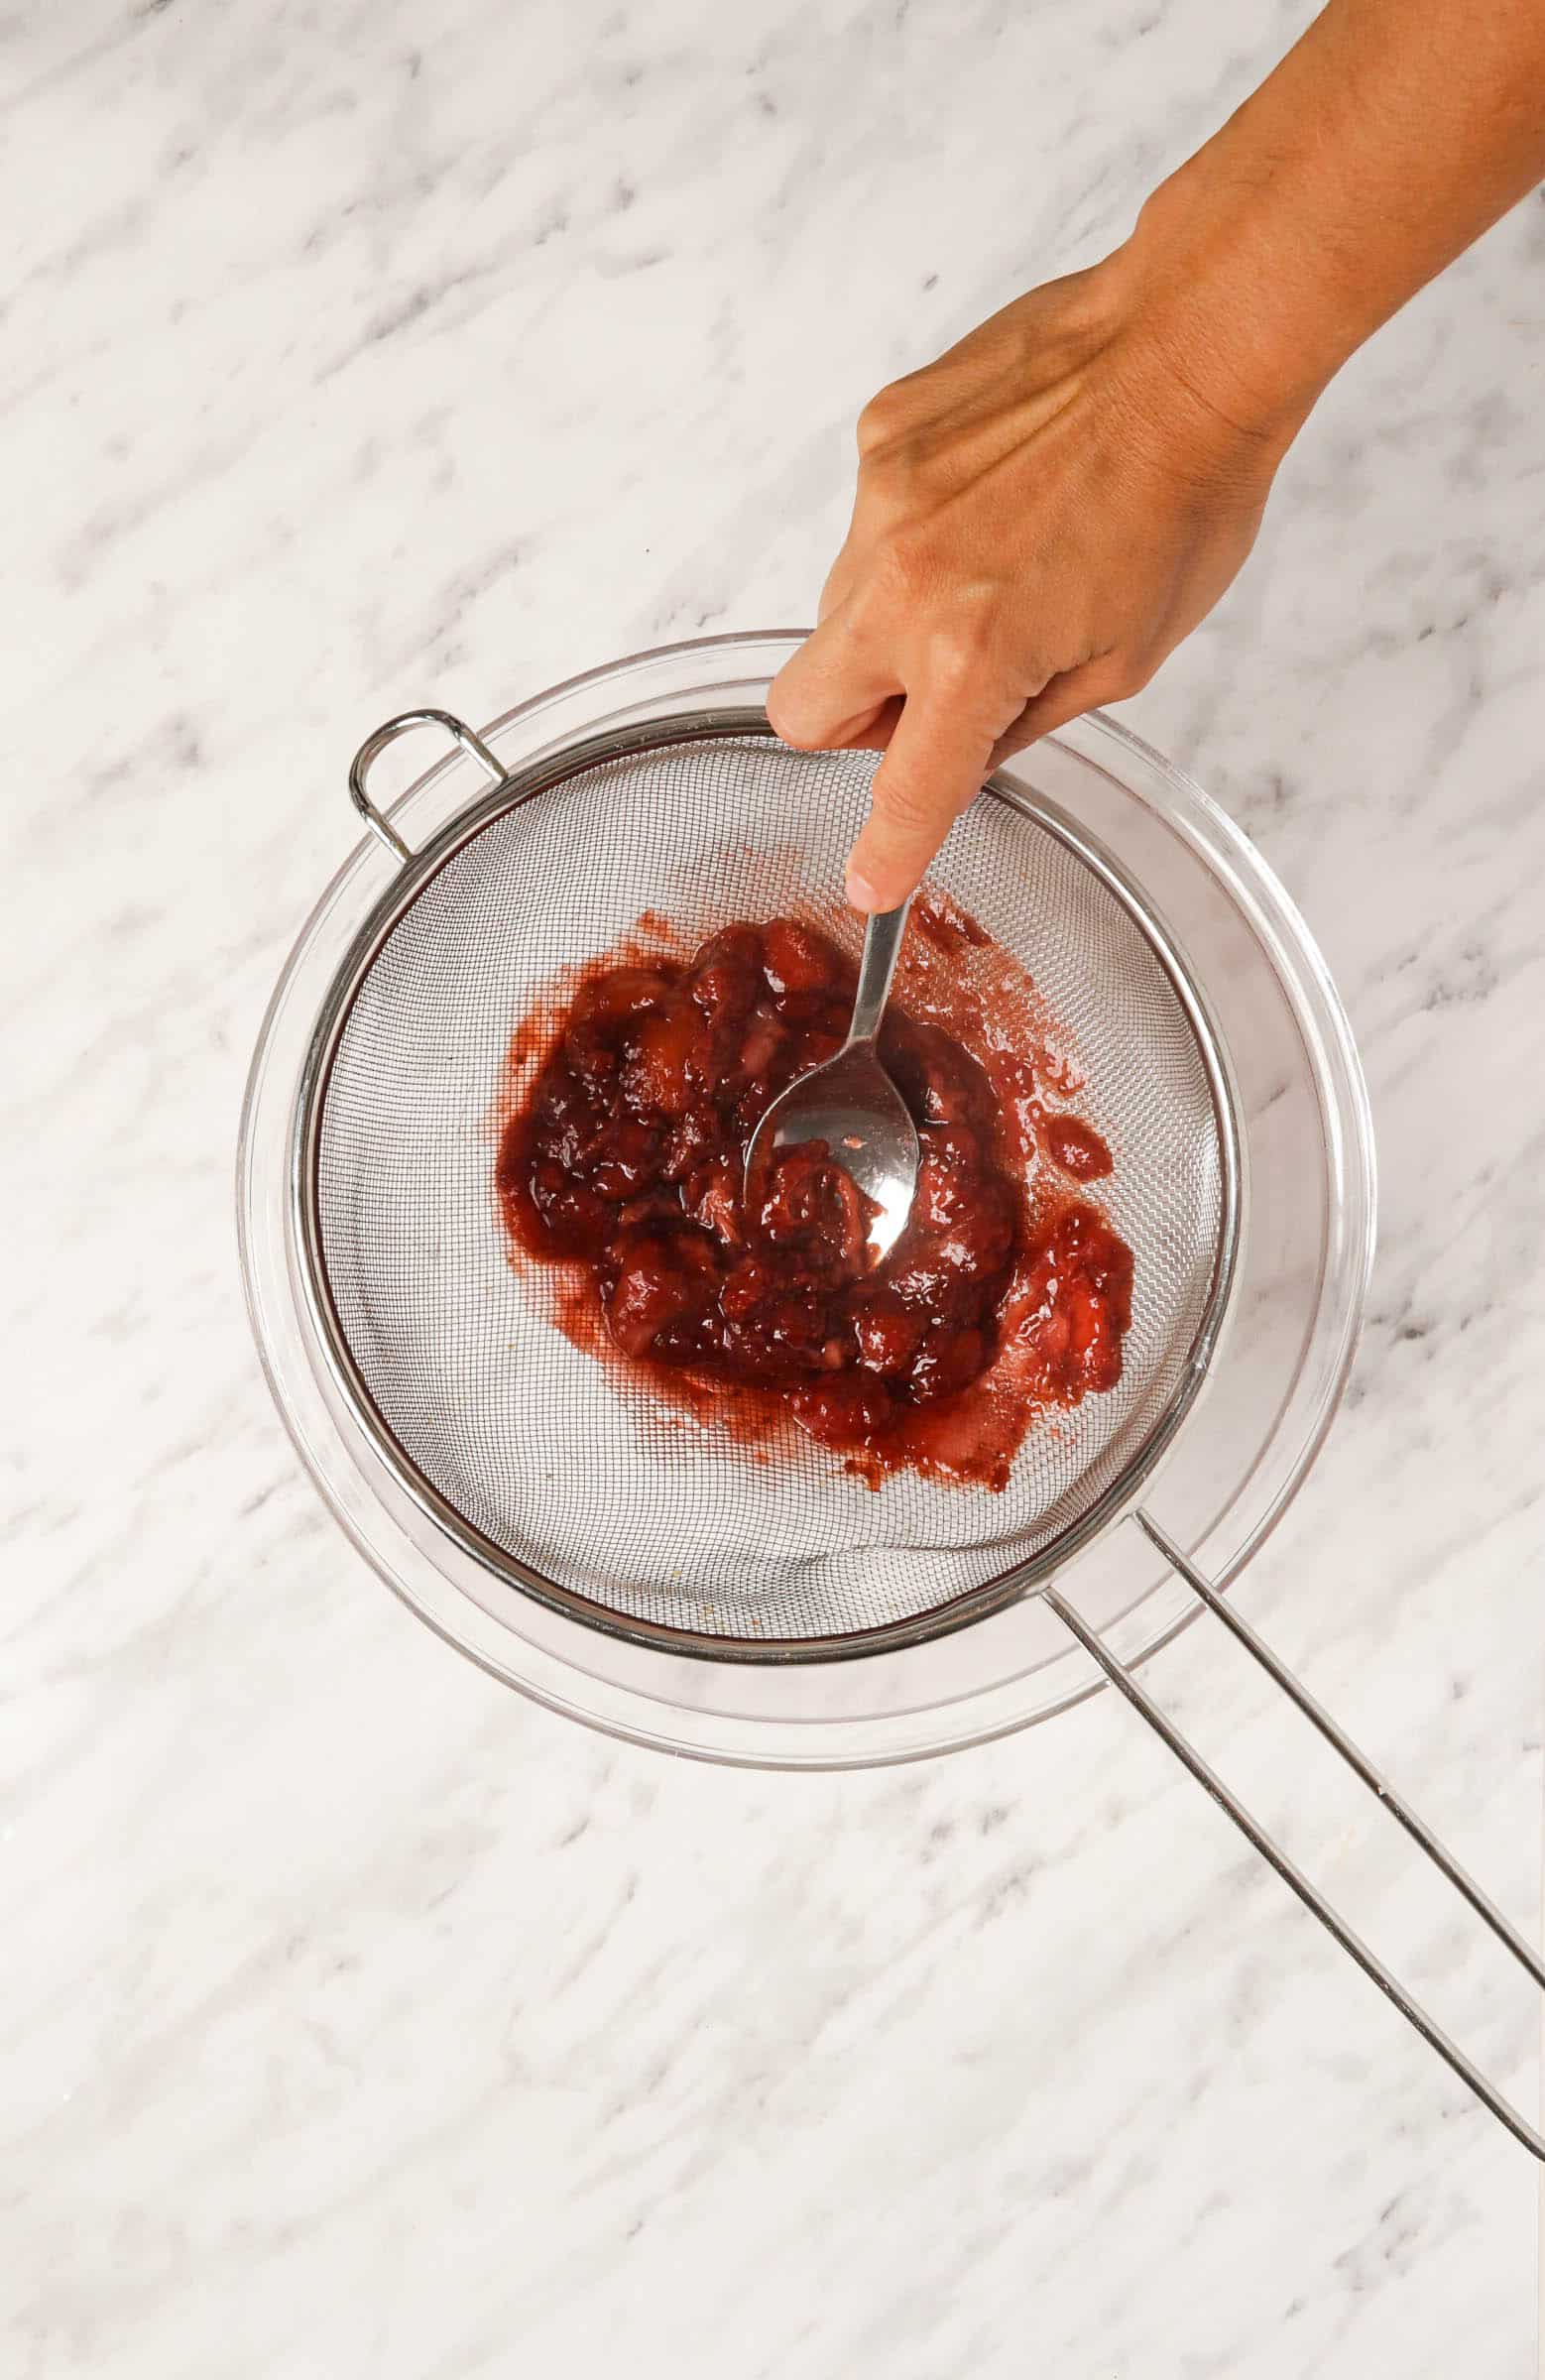 Top view photo of the strawberry mixture in a fine mesh strainer over a bowl. A hand is pressing down on the mixture with the back of a spoon.